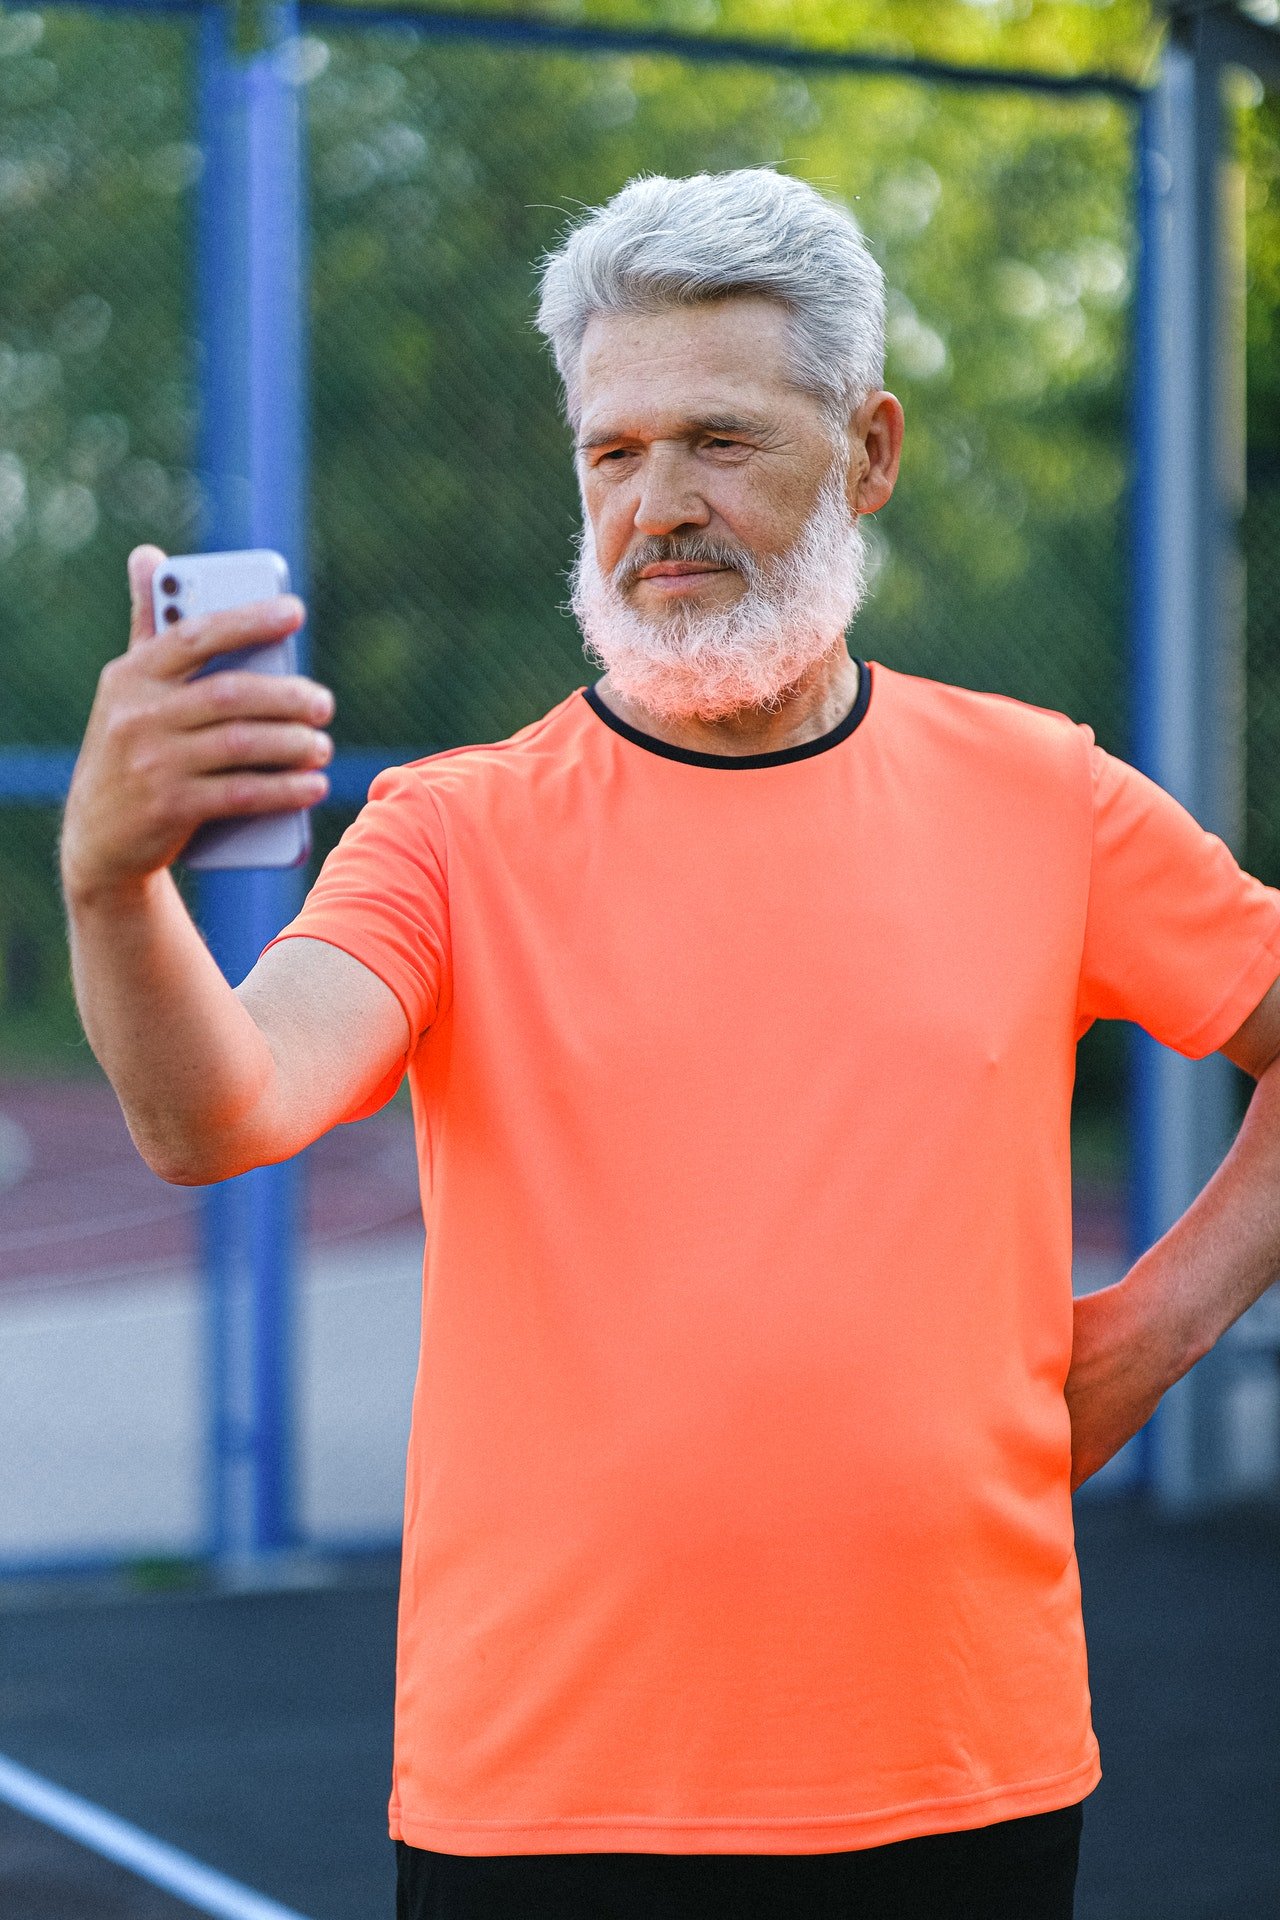 Photo of an old man taking a selfie | Photo: Pexels